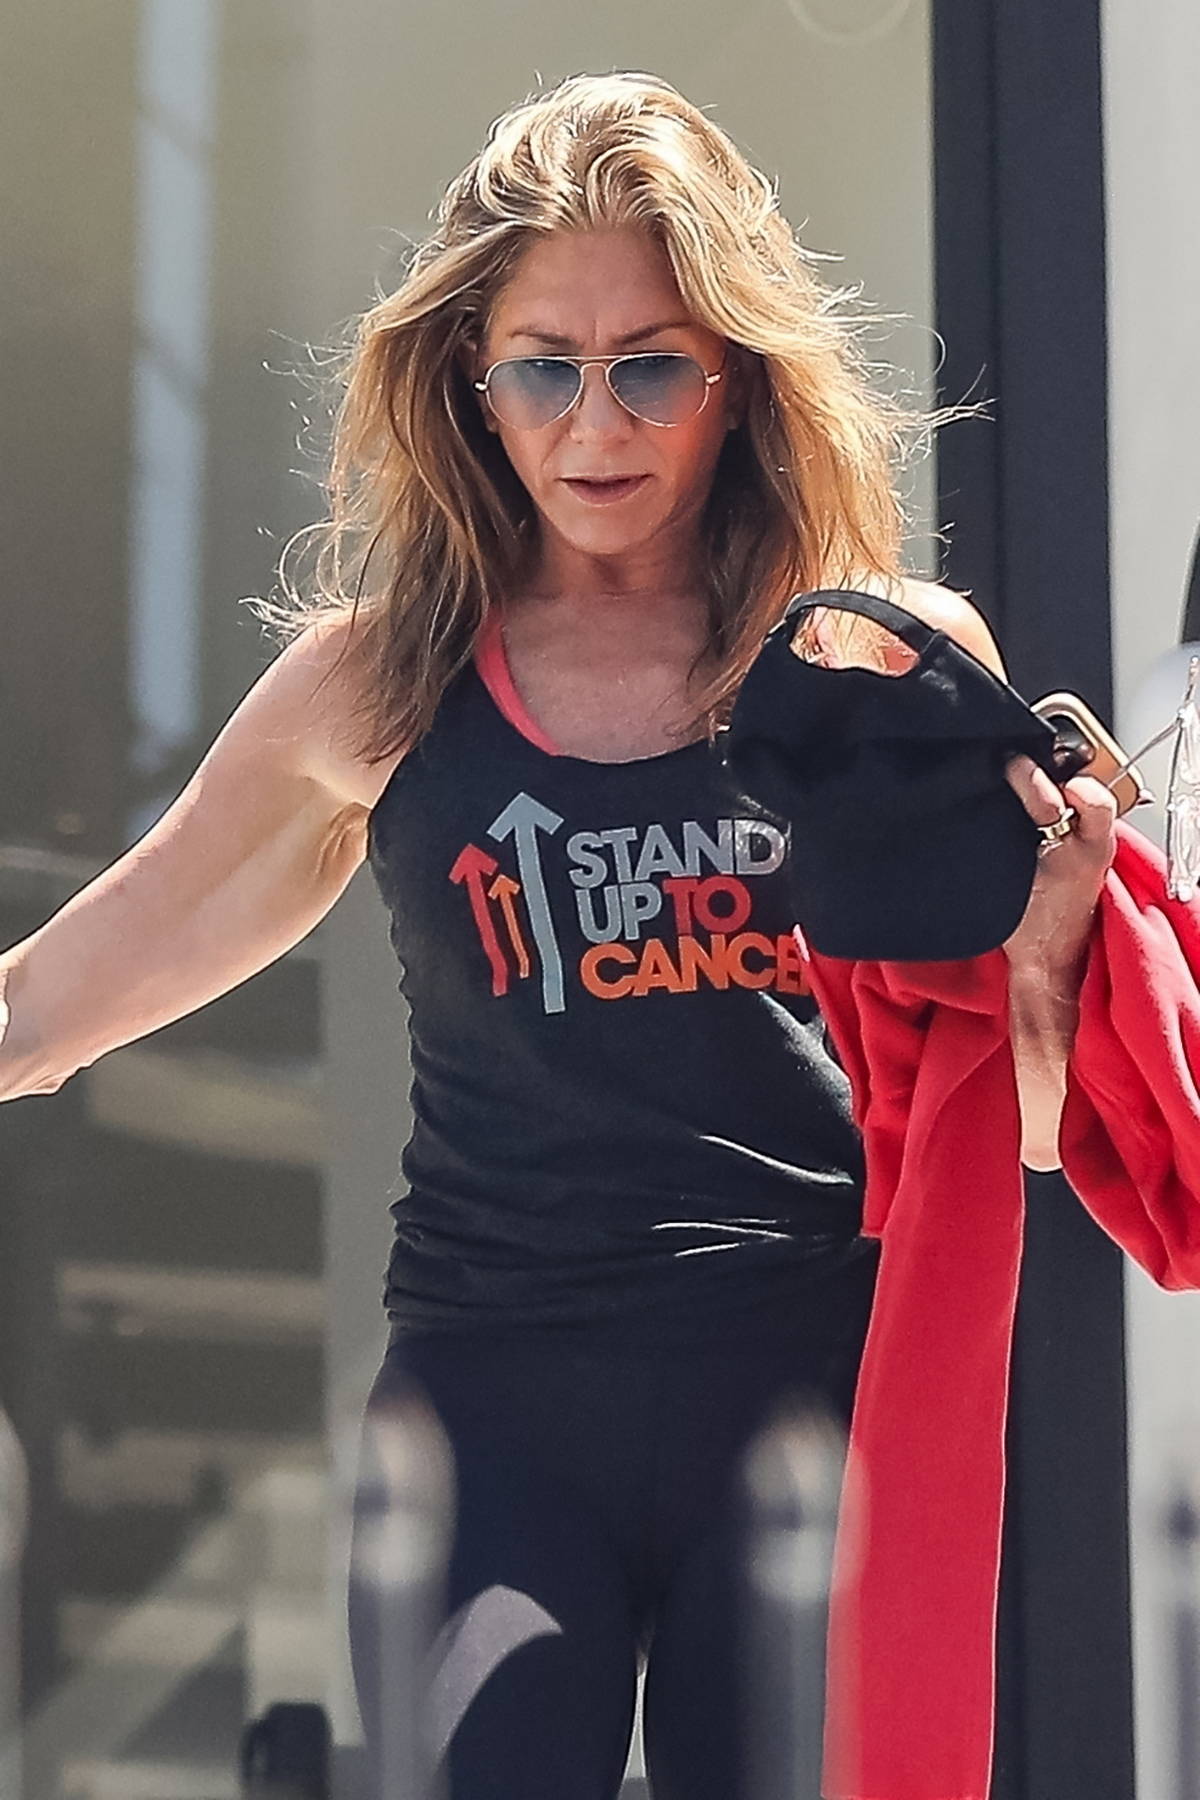 Jennifer Aniston looks fit in a black tank top and leggings while